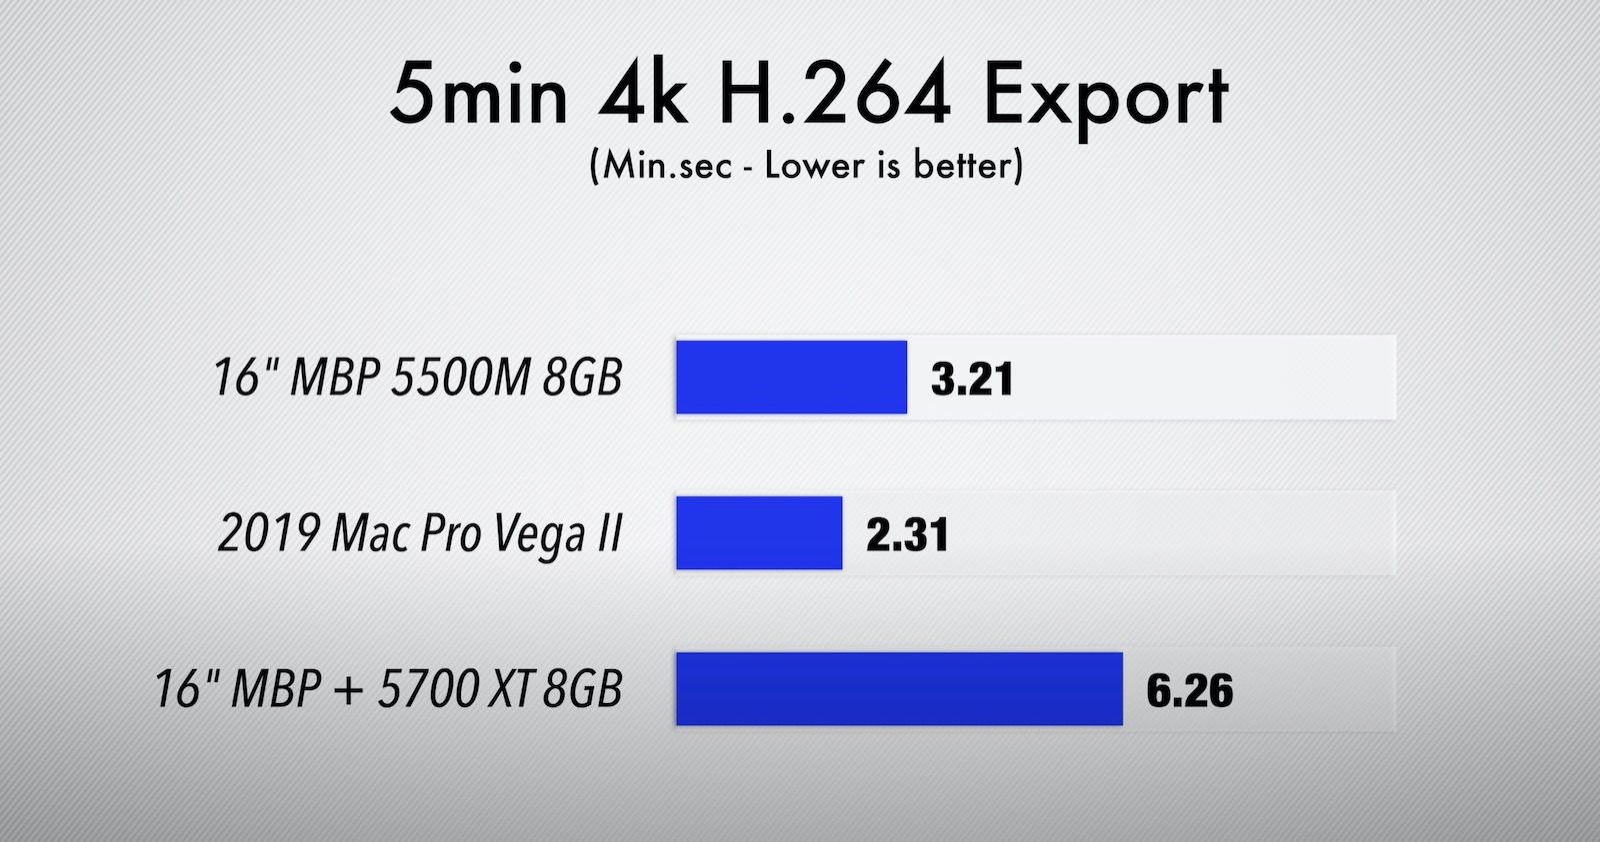 Exporting with egpu